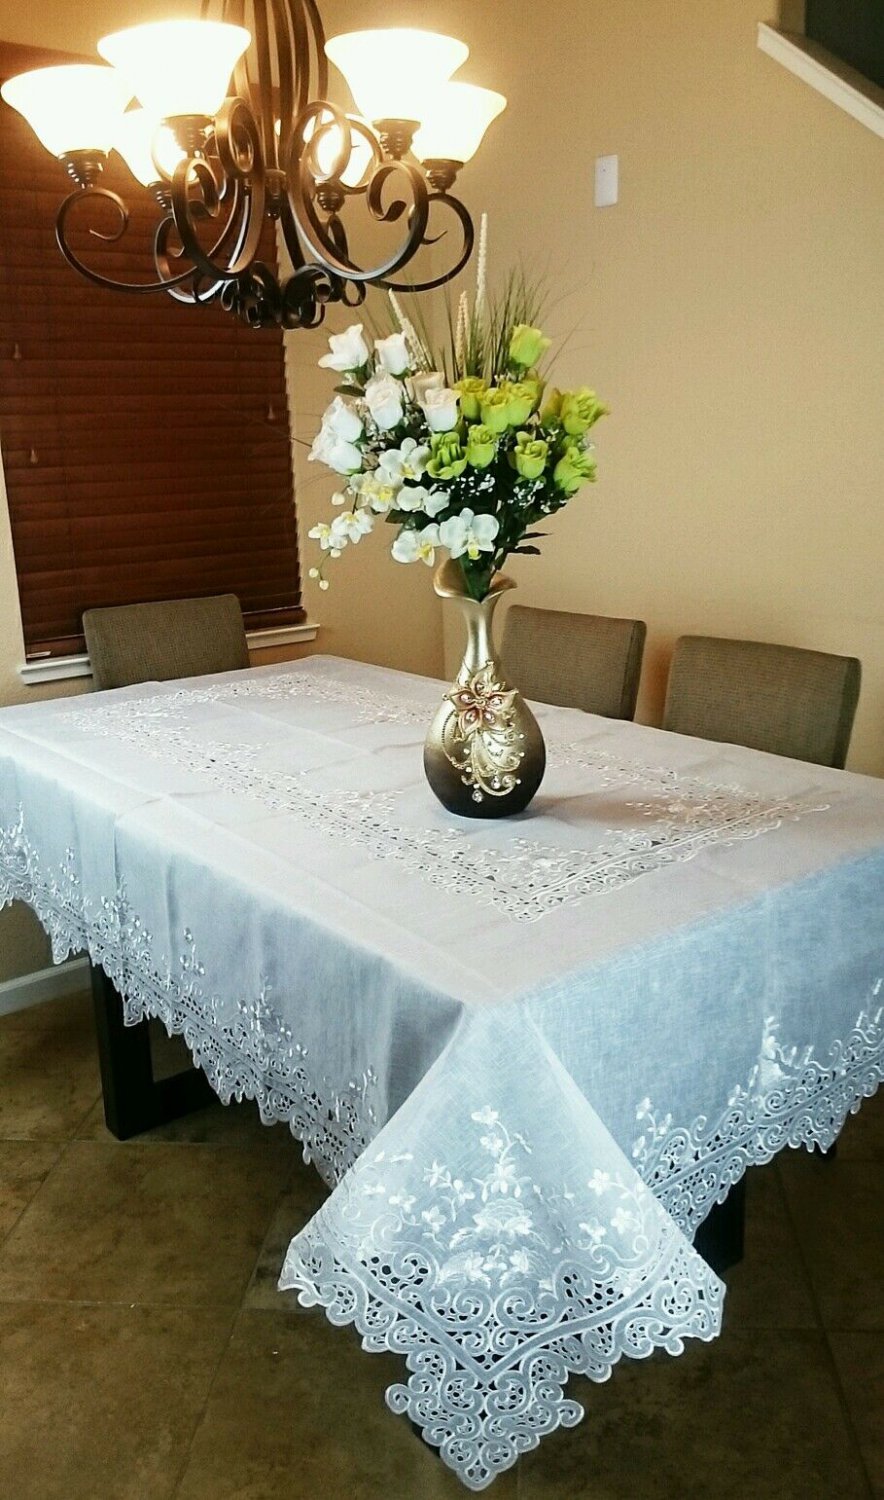 Elegantlinen Embroidered Embroidery Tablecloth with Napkins 72x90" White/Beige 